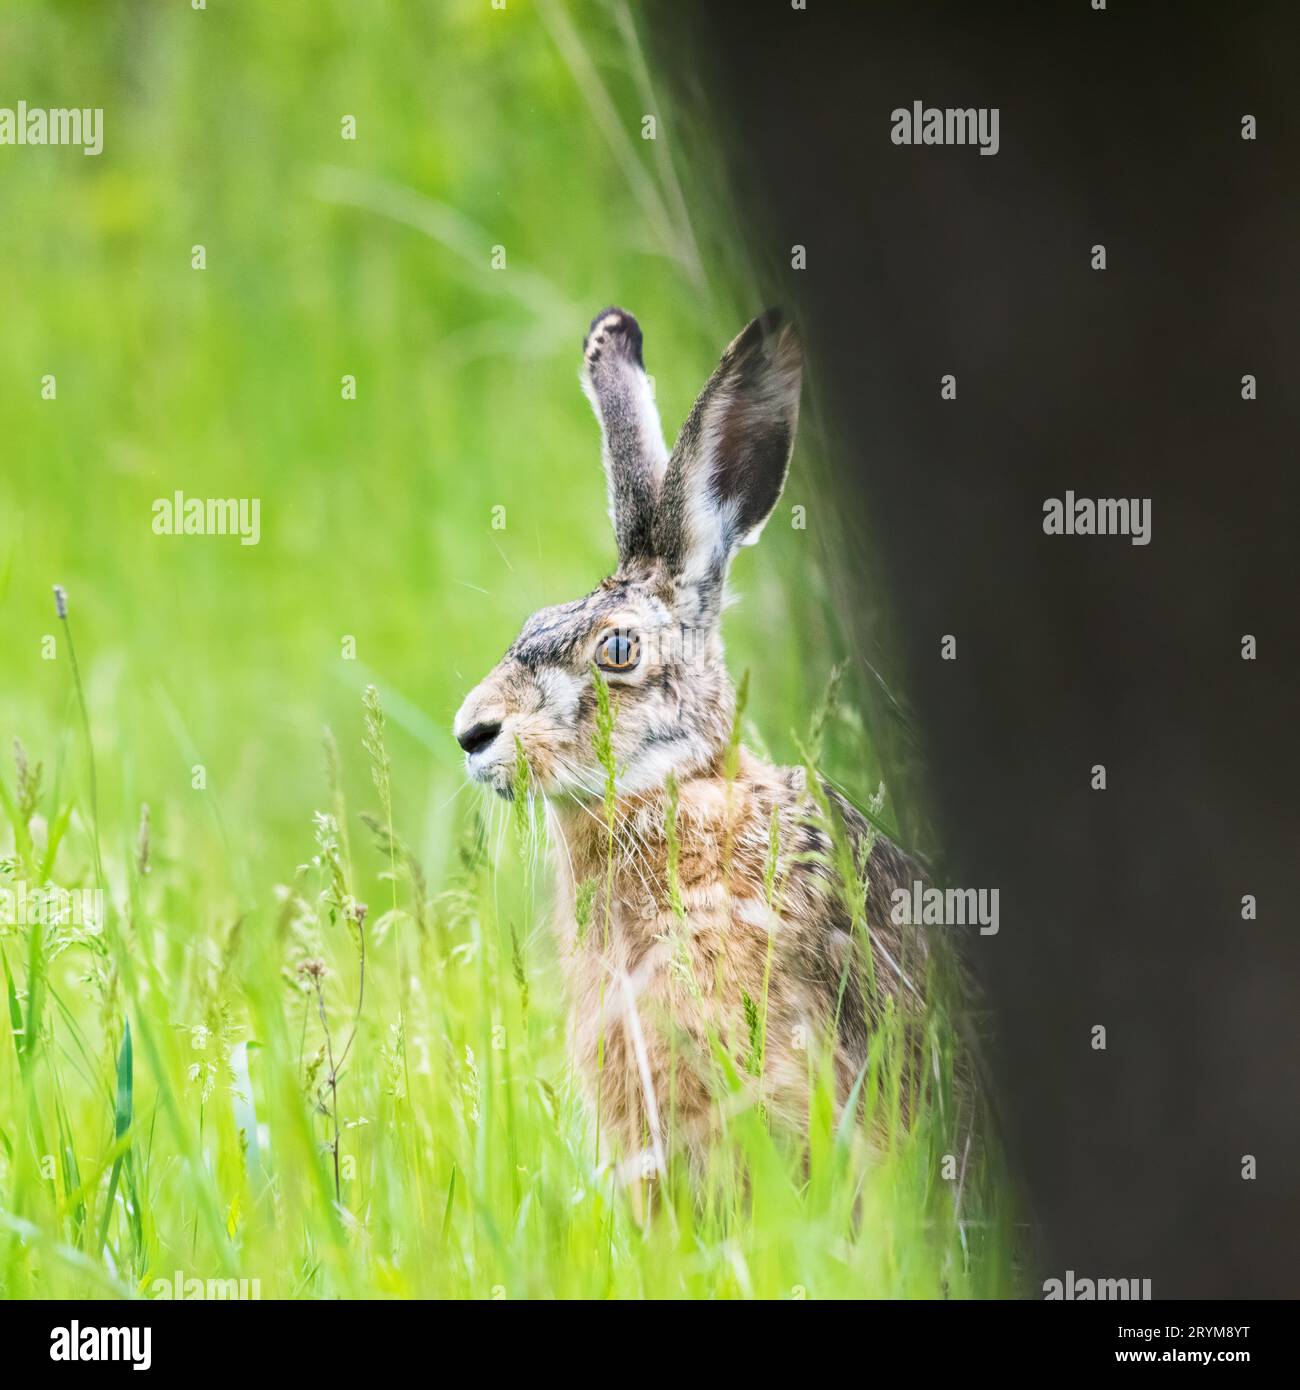 A well-disguised lone hare pauses behind a tree Stock Photo